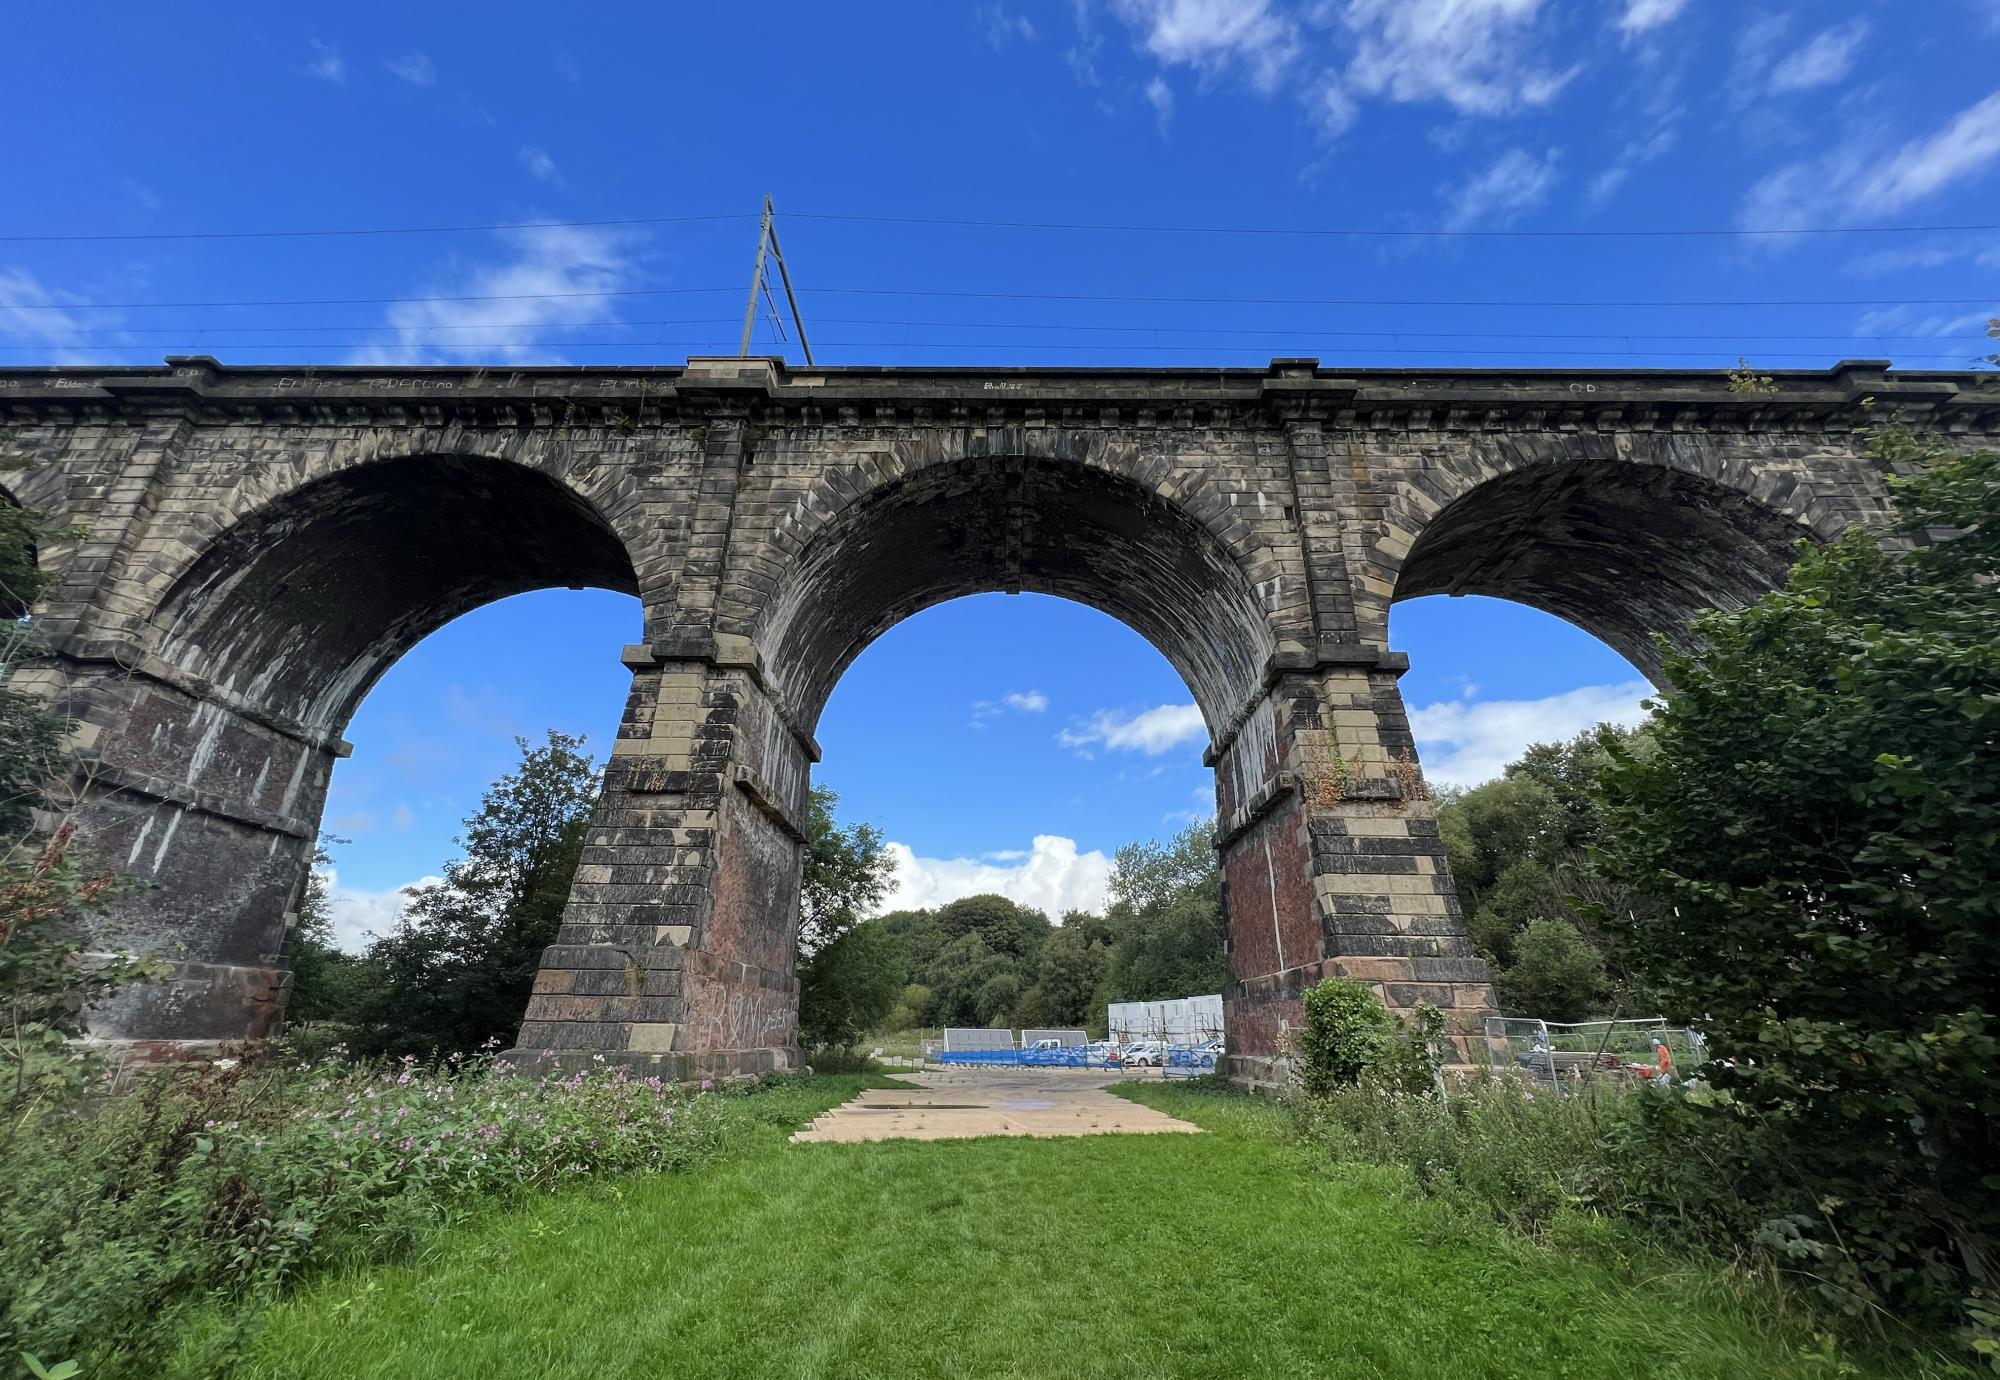 World’s oldest railway viaduct gets repairs ahead of its 200th anniversary